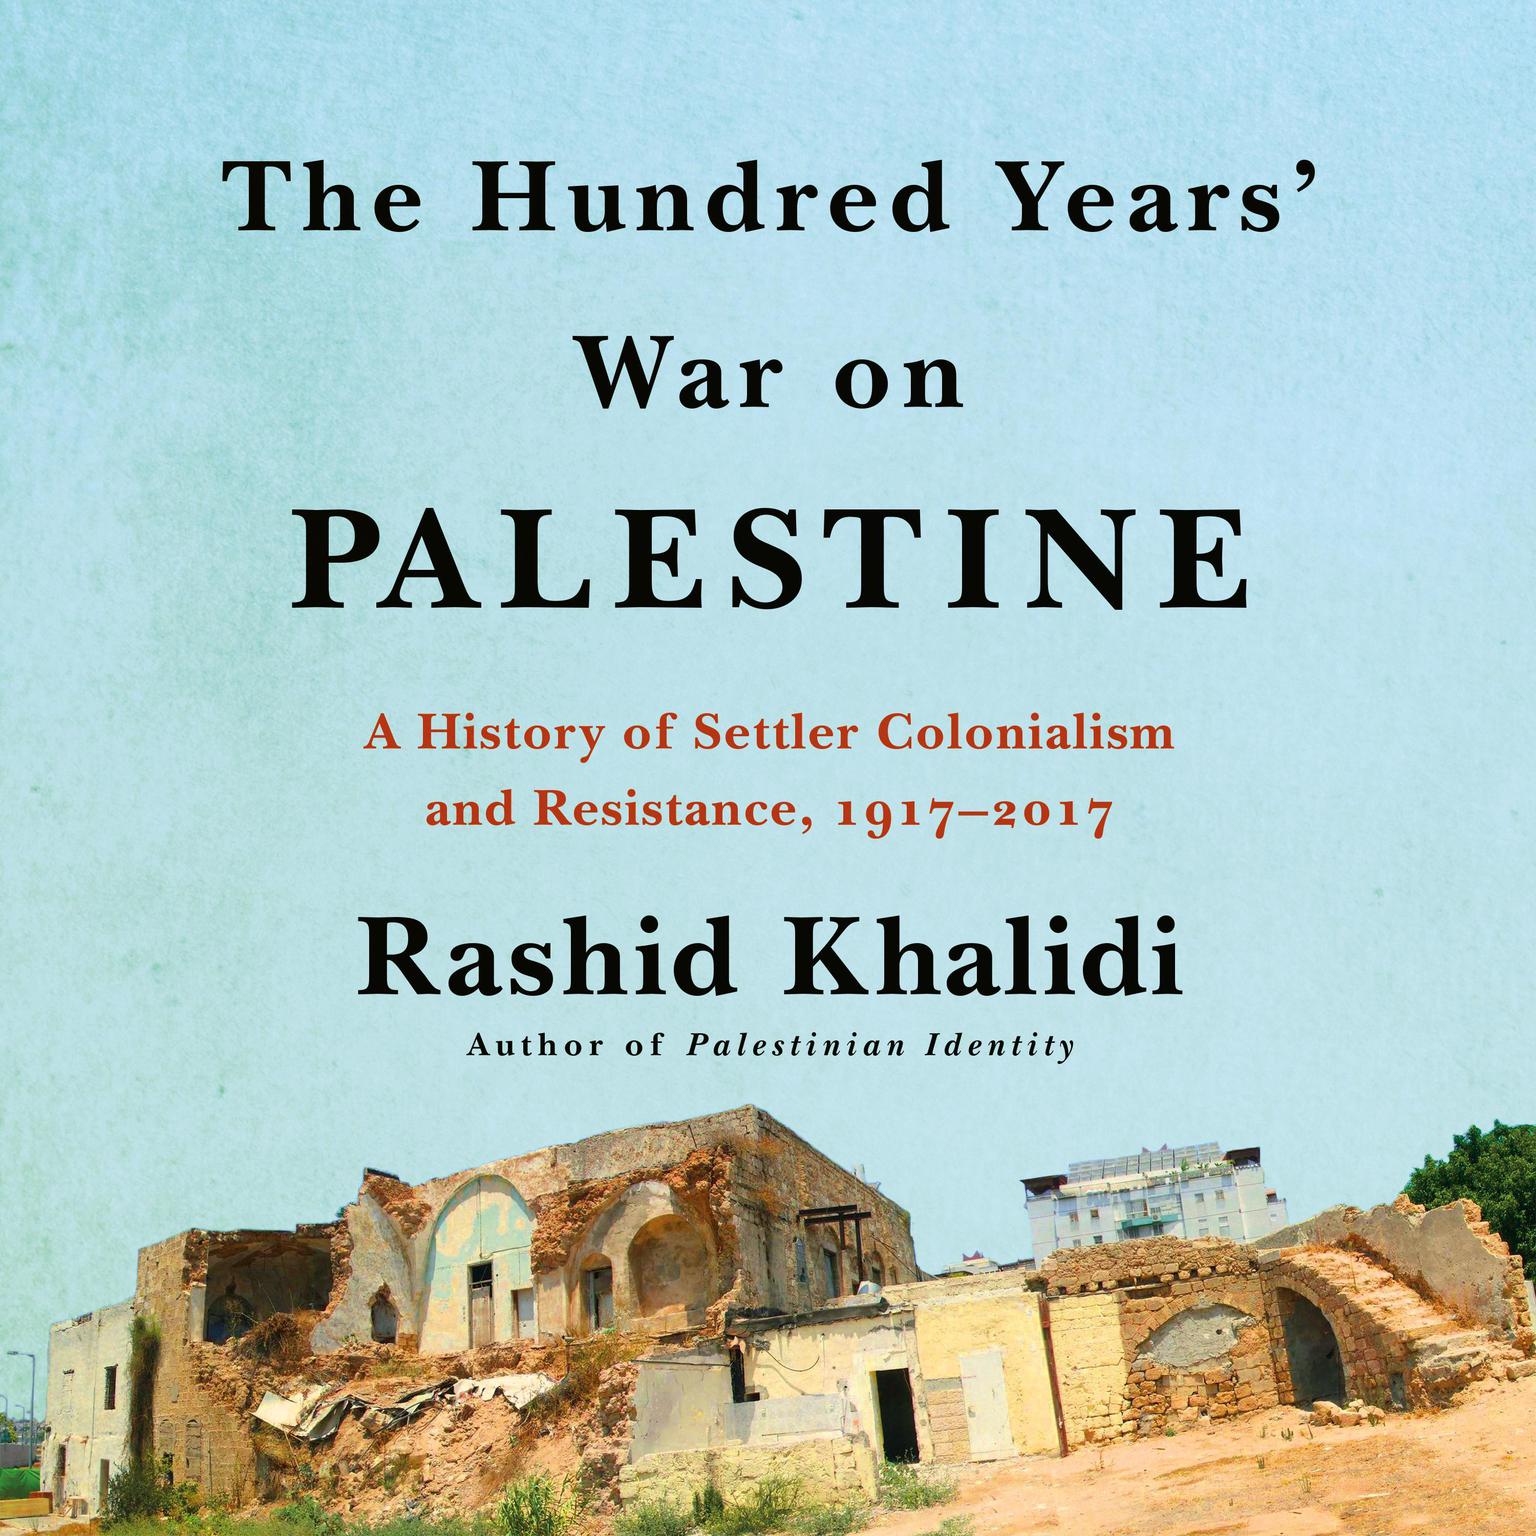 The Hundred Years War on Palestine: A History of Settler Colonialism and Resistance, 1917–2017 Audiobook, by Rashid Khalidi